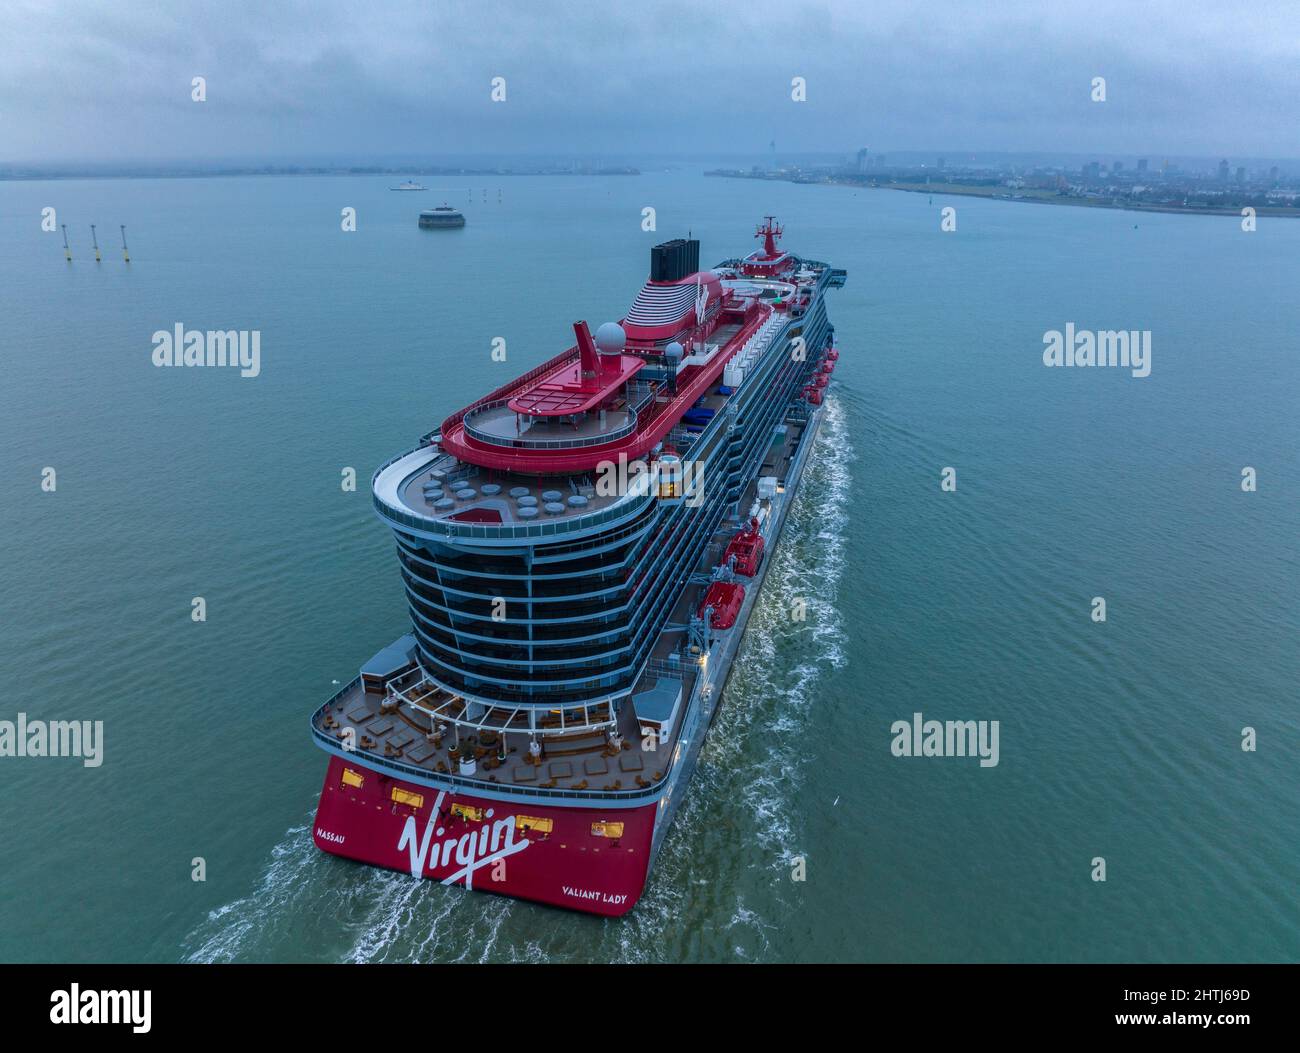 Valiant lady cruise ship by Virgin Voyages arriving at Portsmouth International Port England, early morning Stock Photo